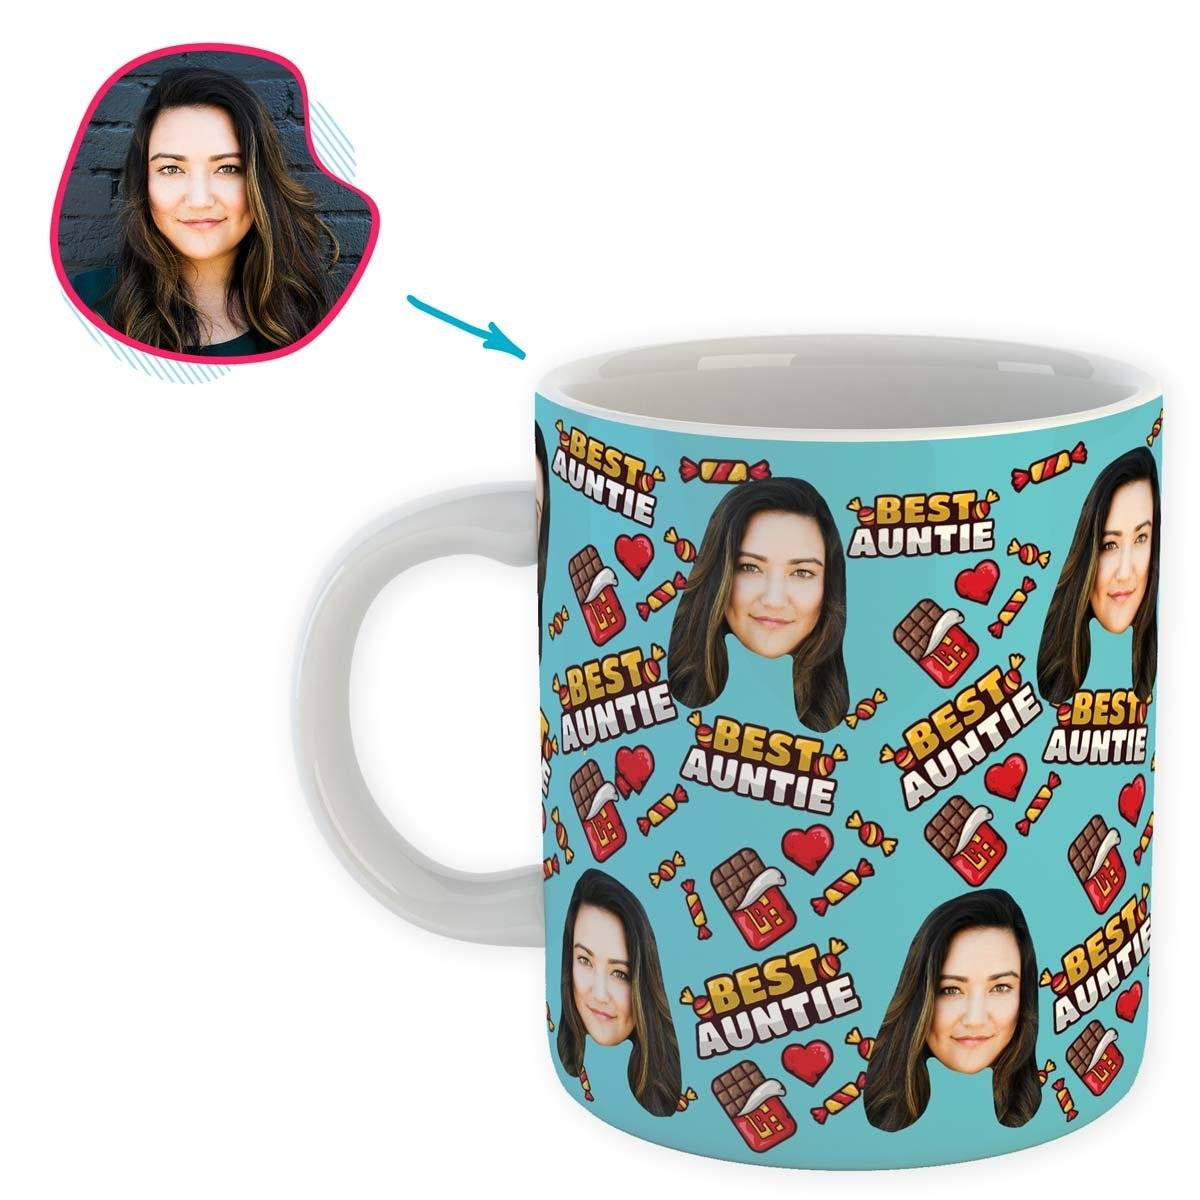 Blue Auntie personalized mug with photo of face printed on it